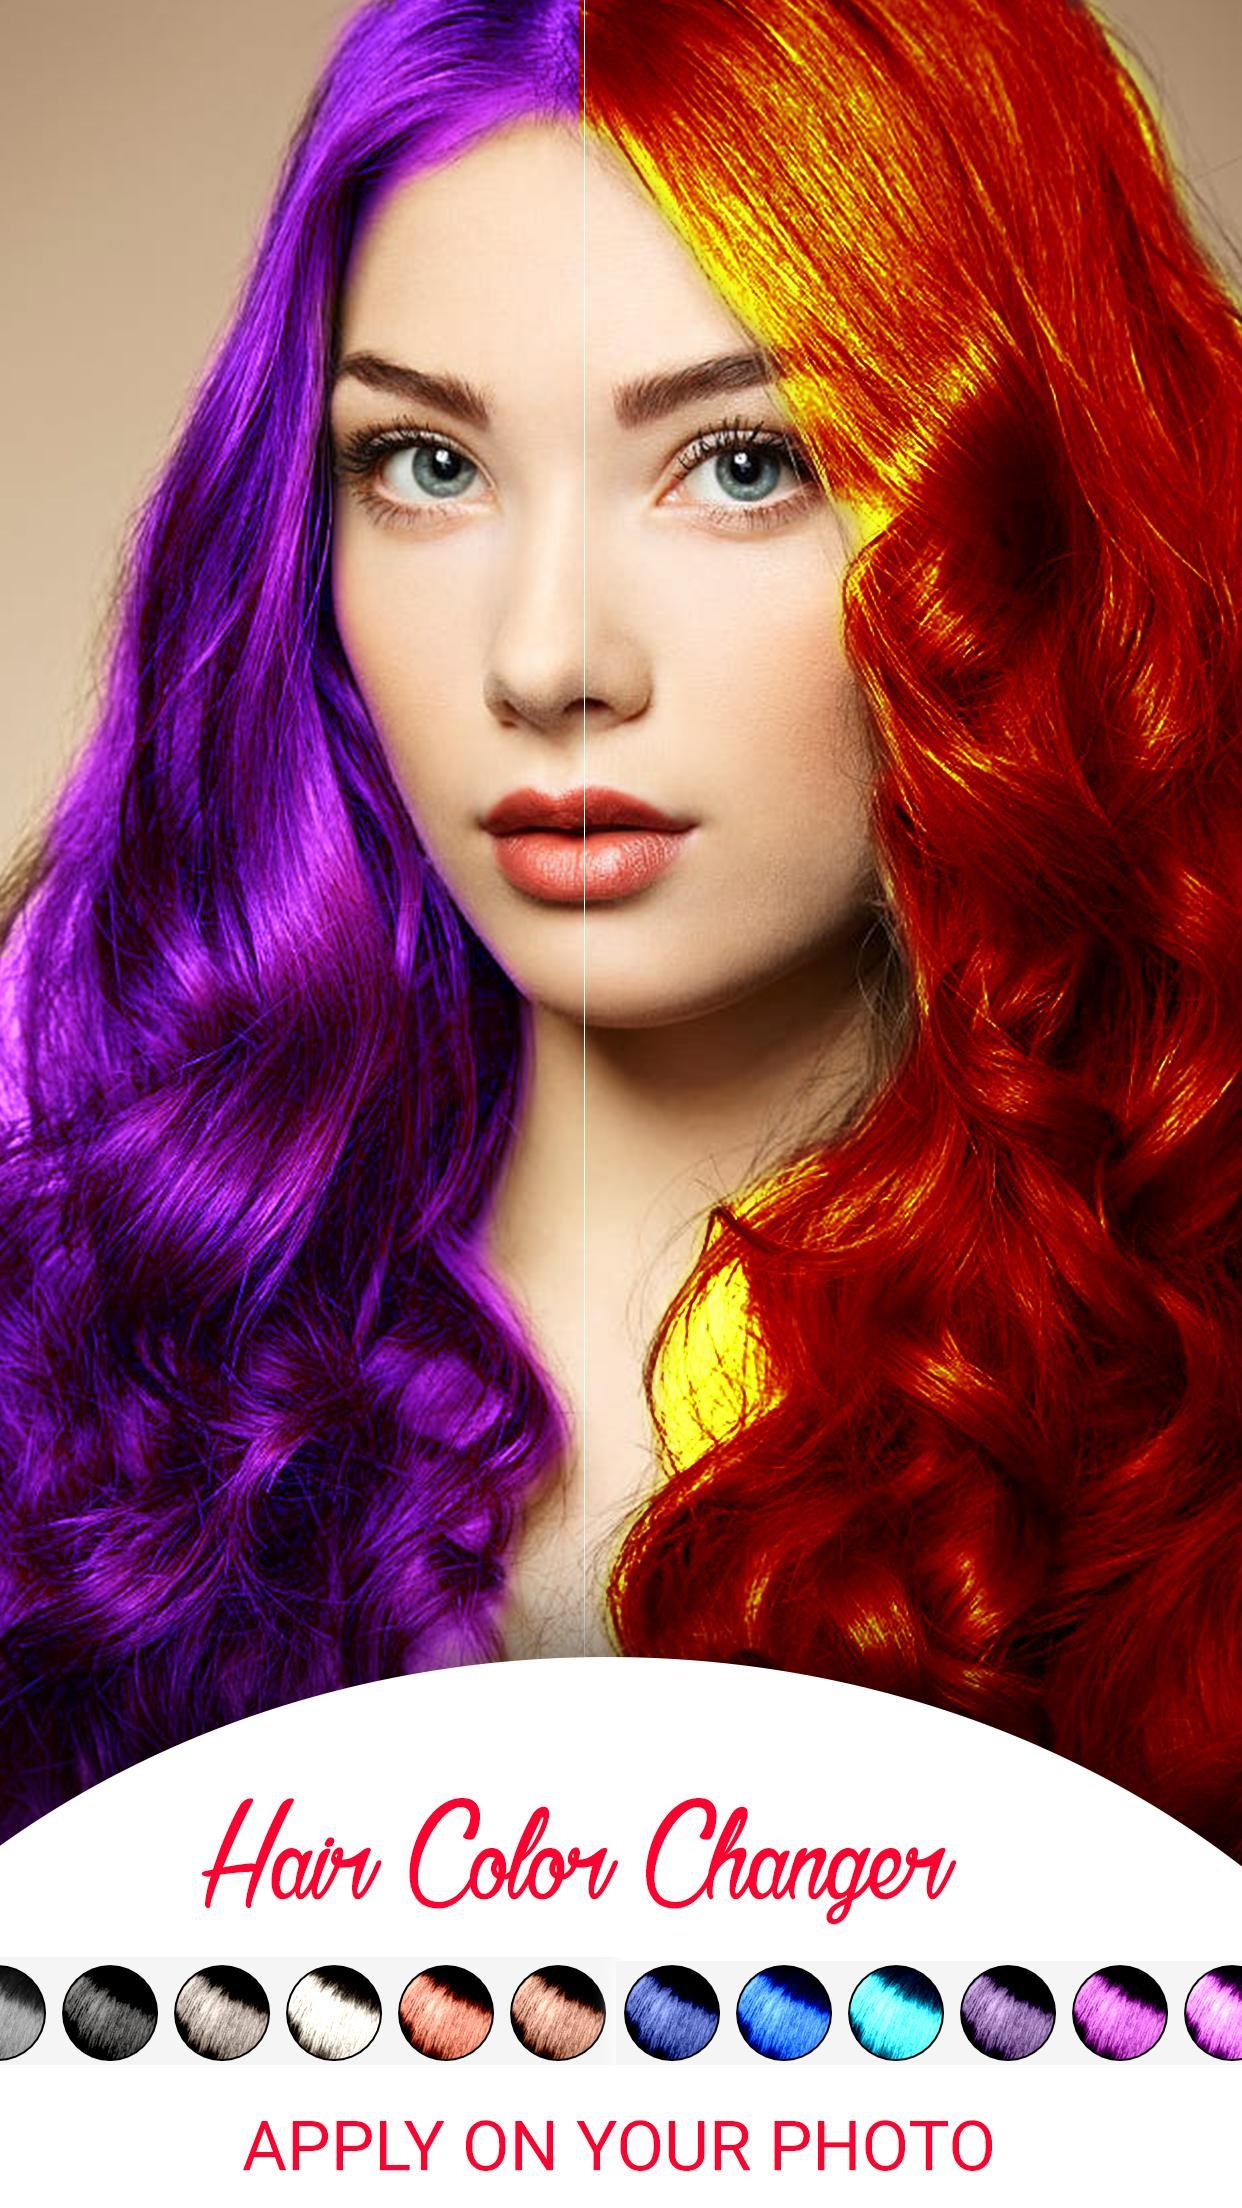 Hair Color Change Photo Editor for Android - APK Download